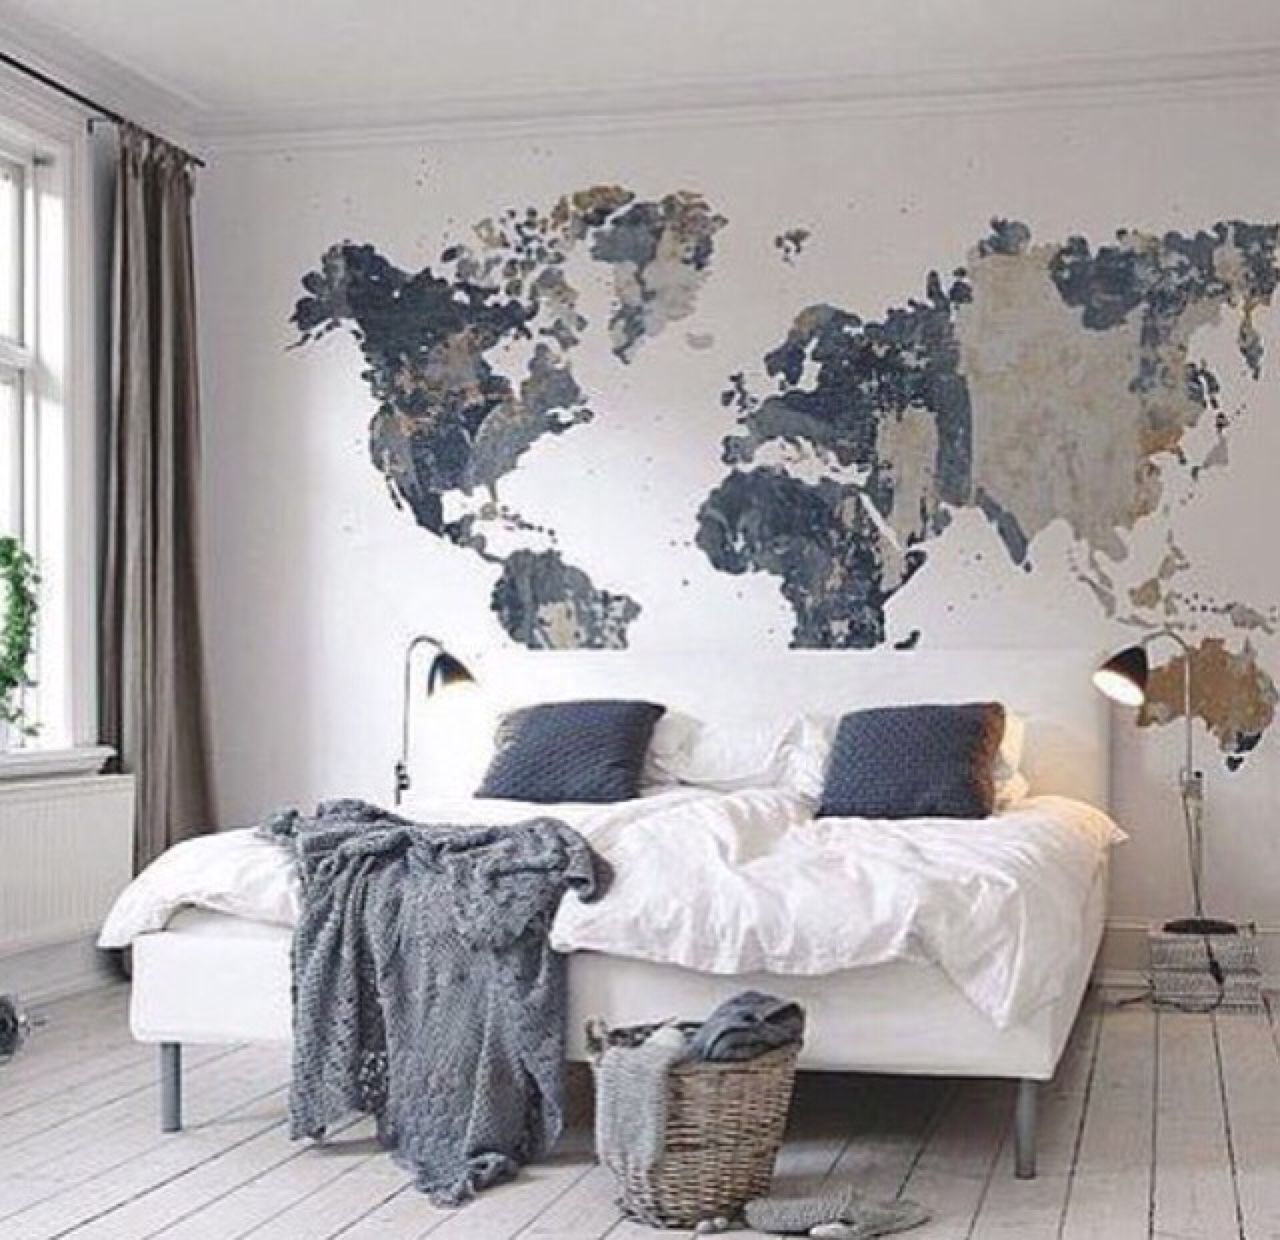 cool map mural See various wall mural designs at http://www.inkshuffle